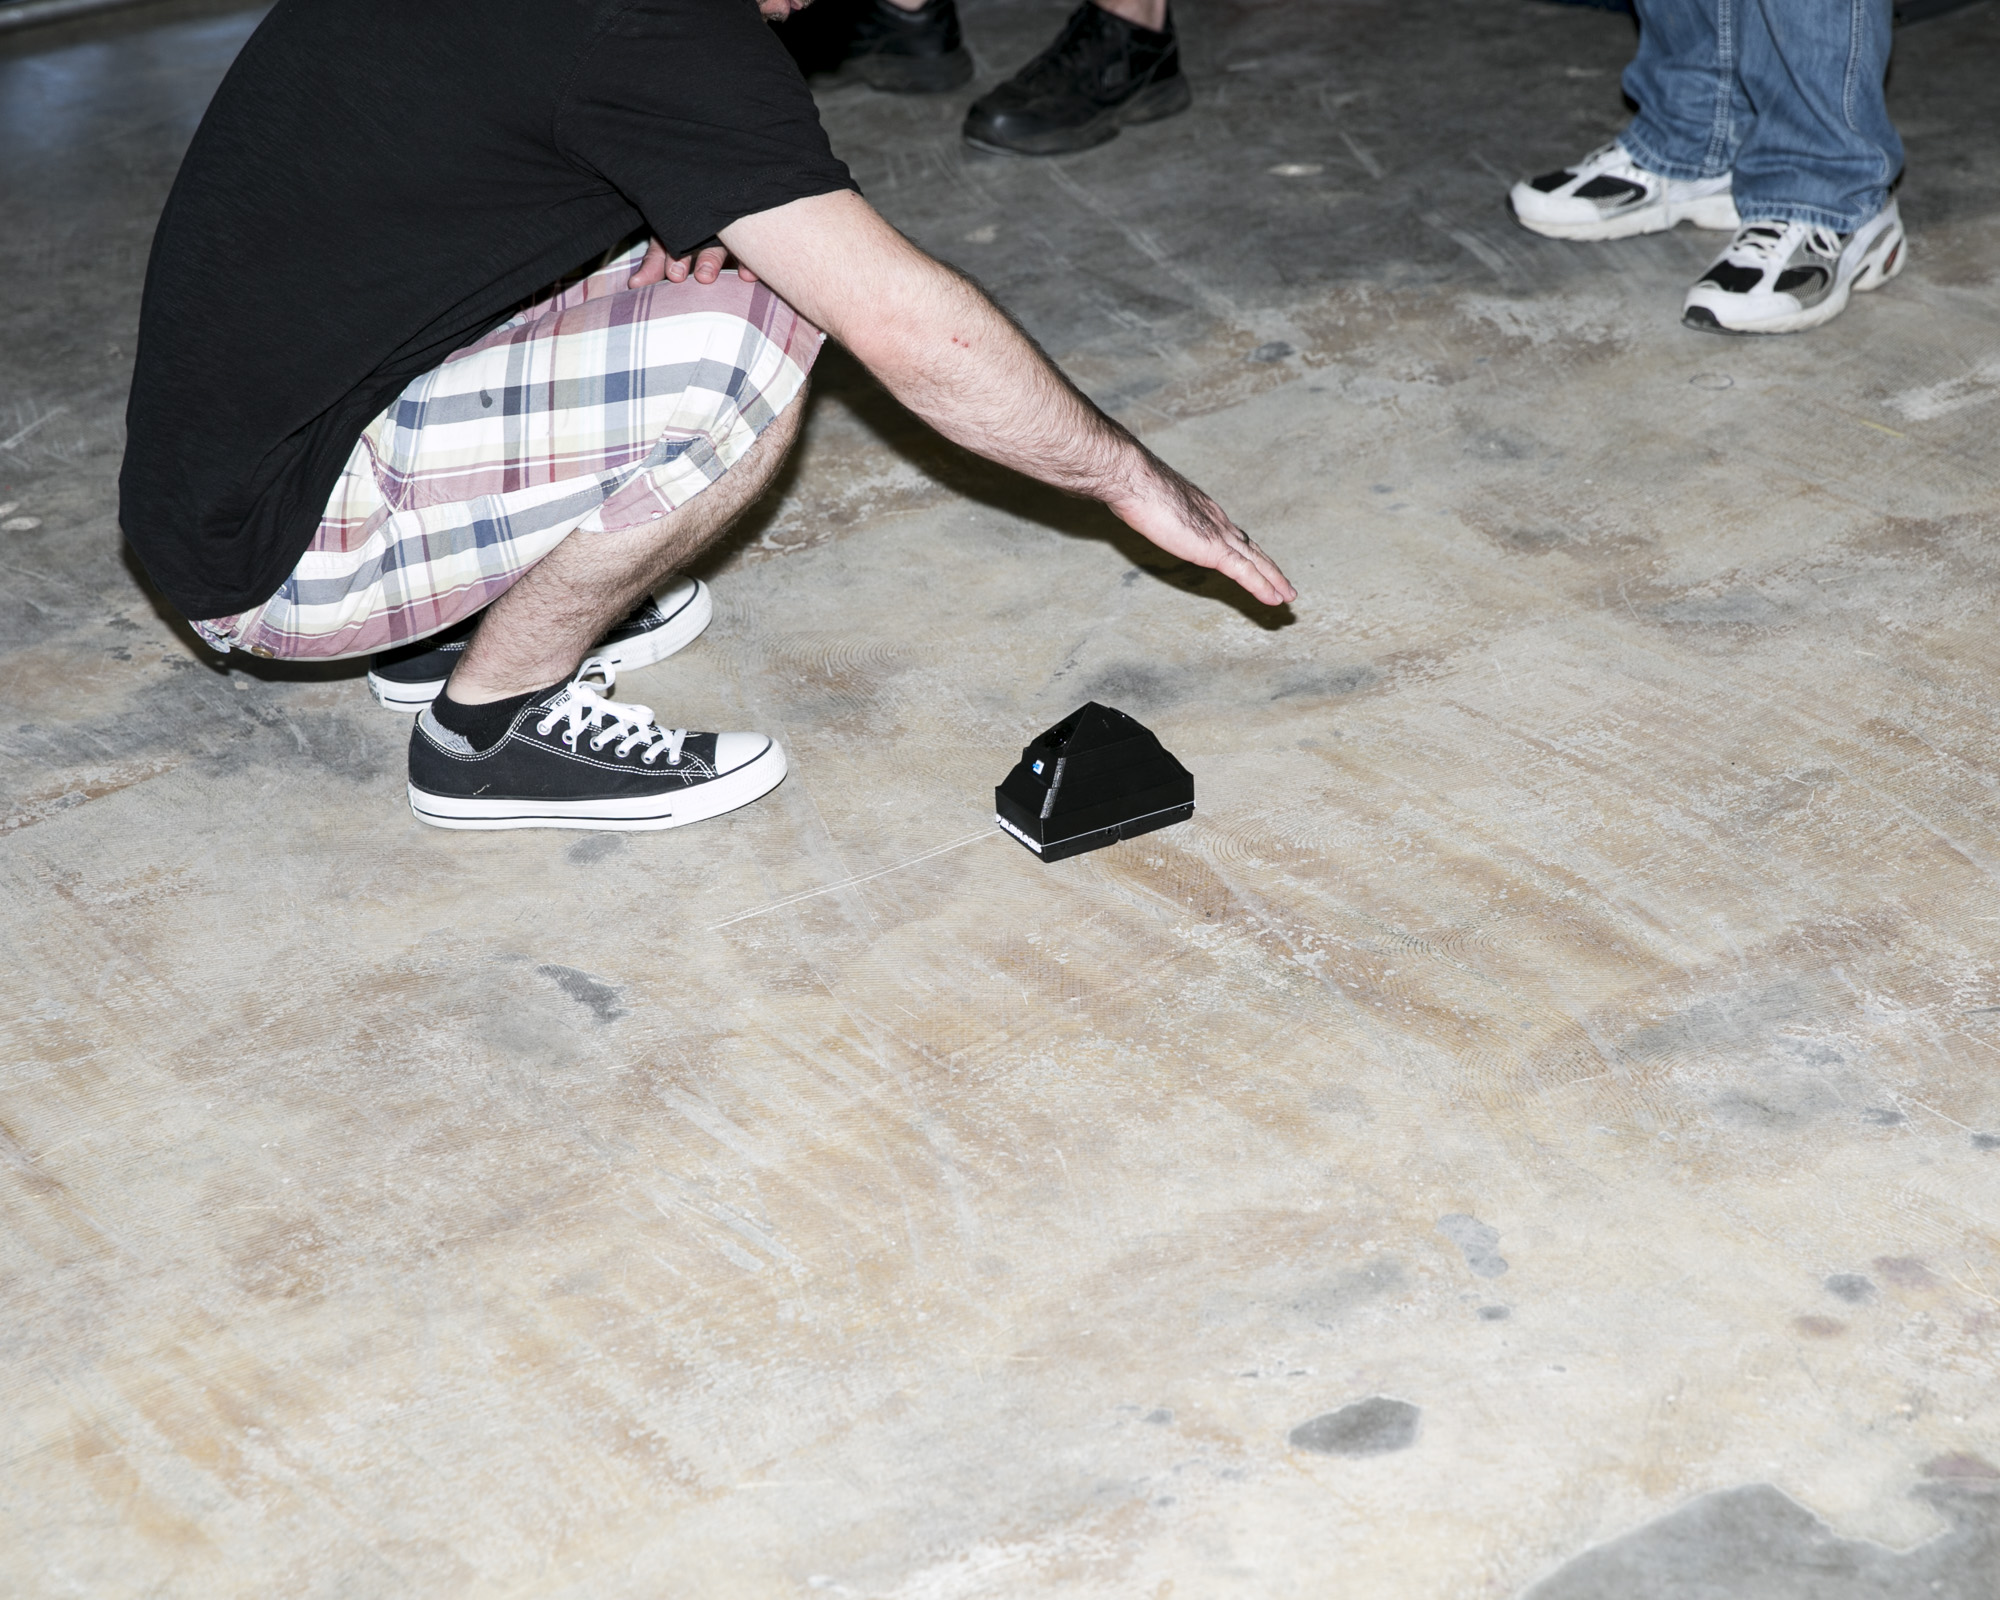  A vendor demonstrates an ultrasonic motion sensor used for detecting paranormal activity. 